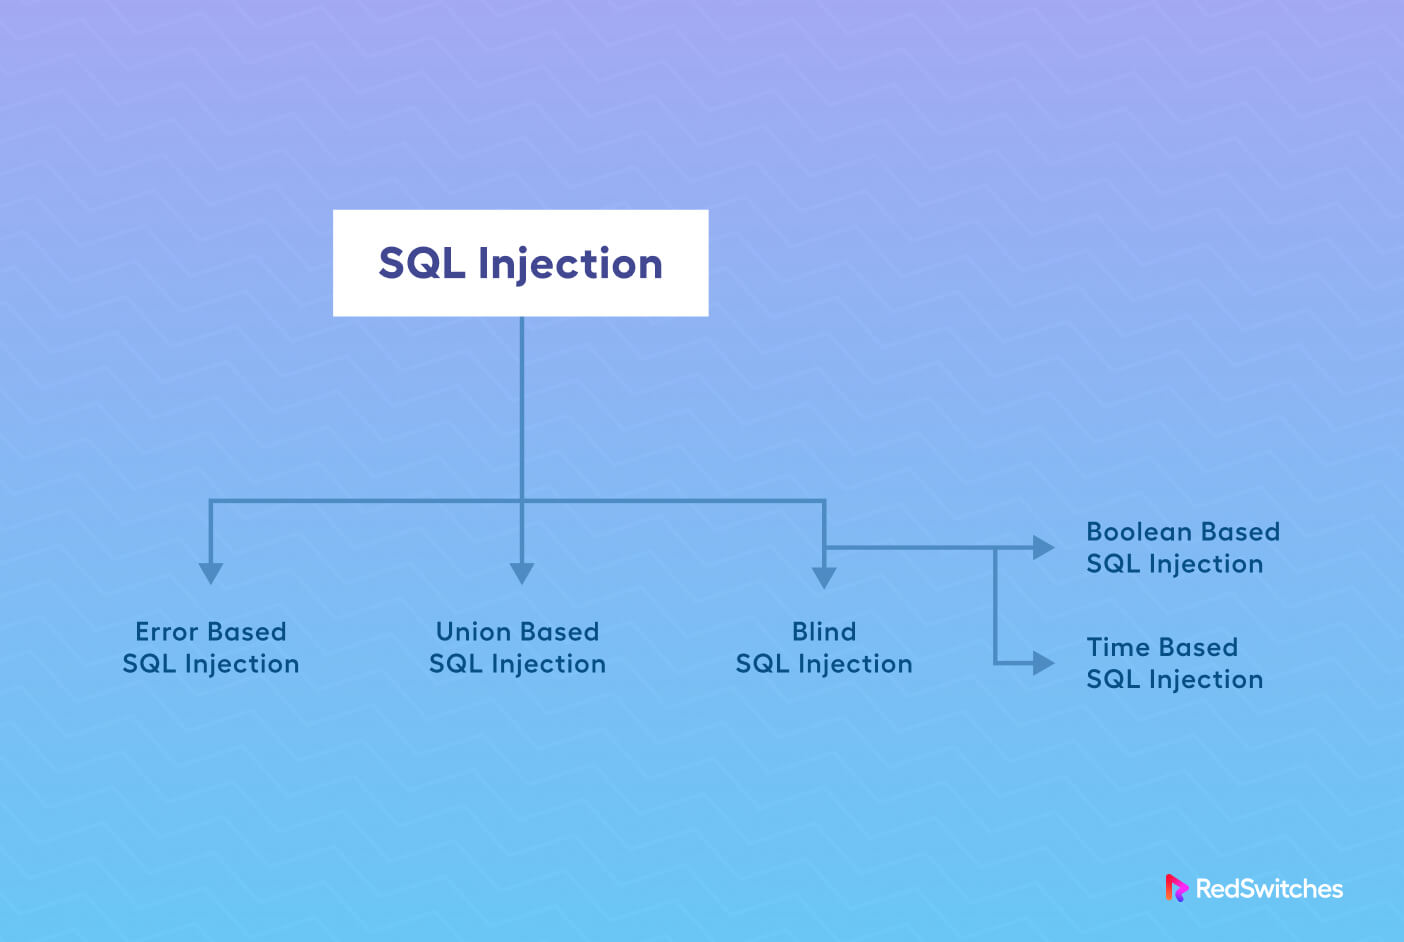 Types of SQL injection attacks